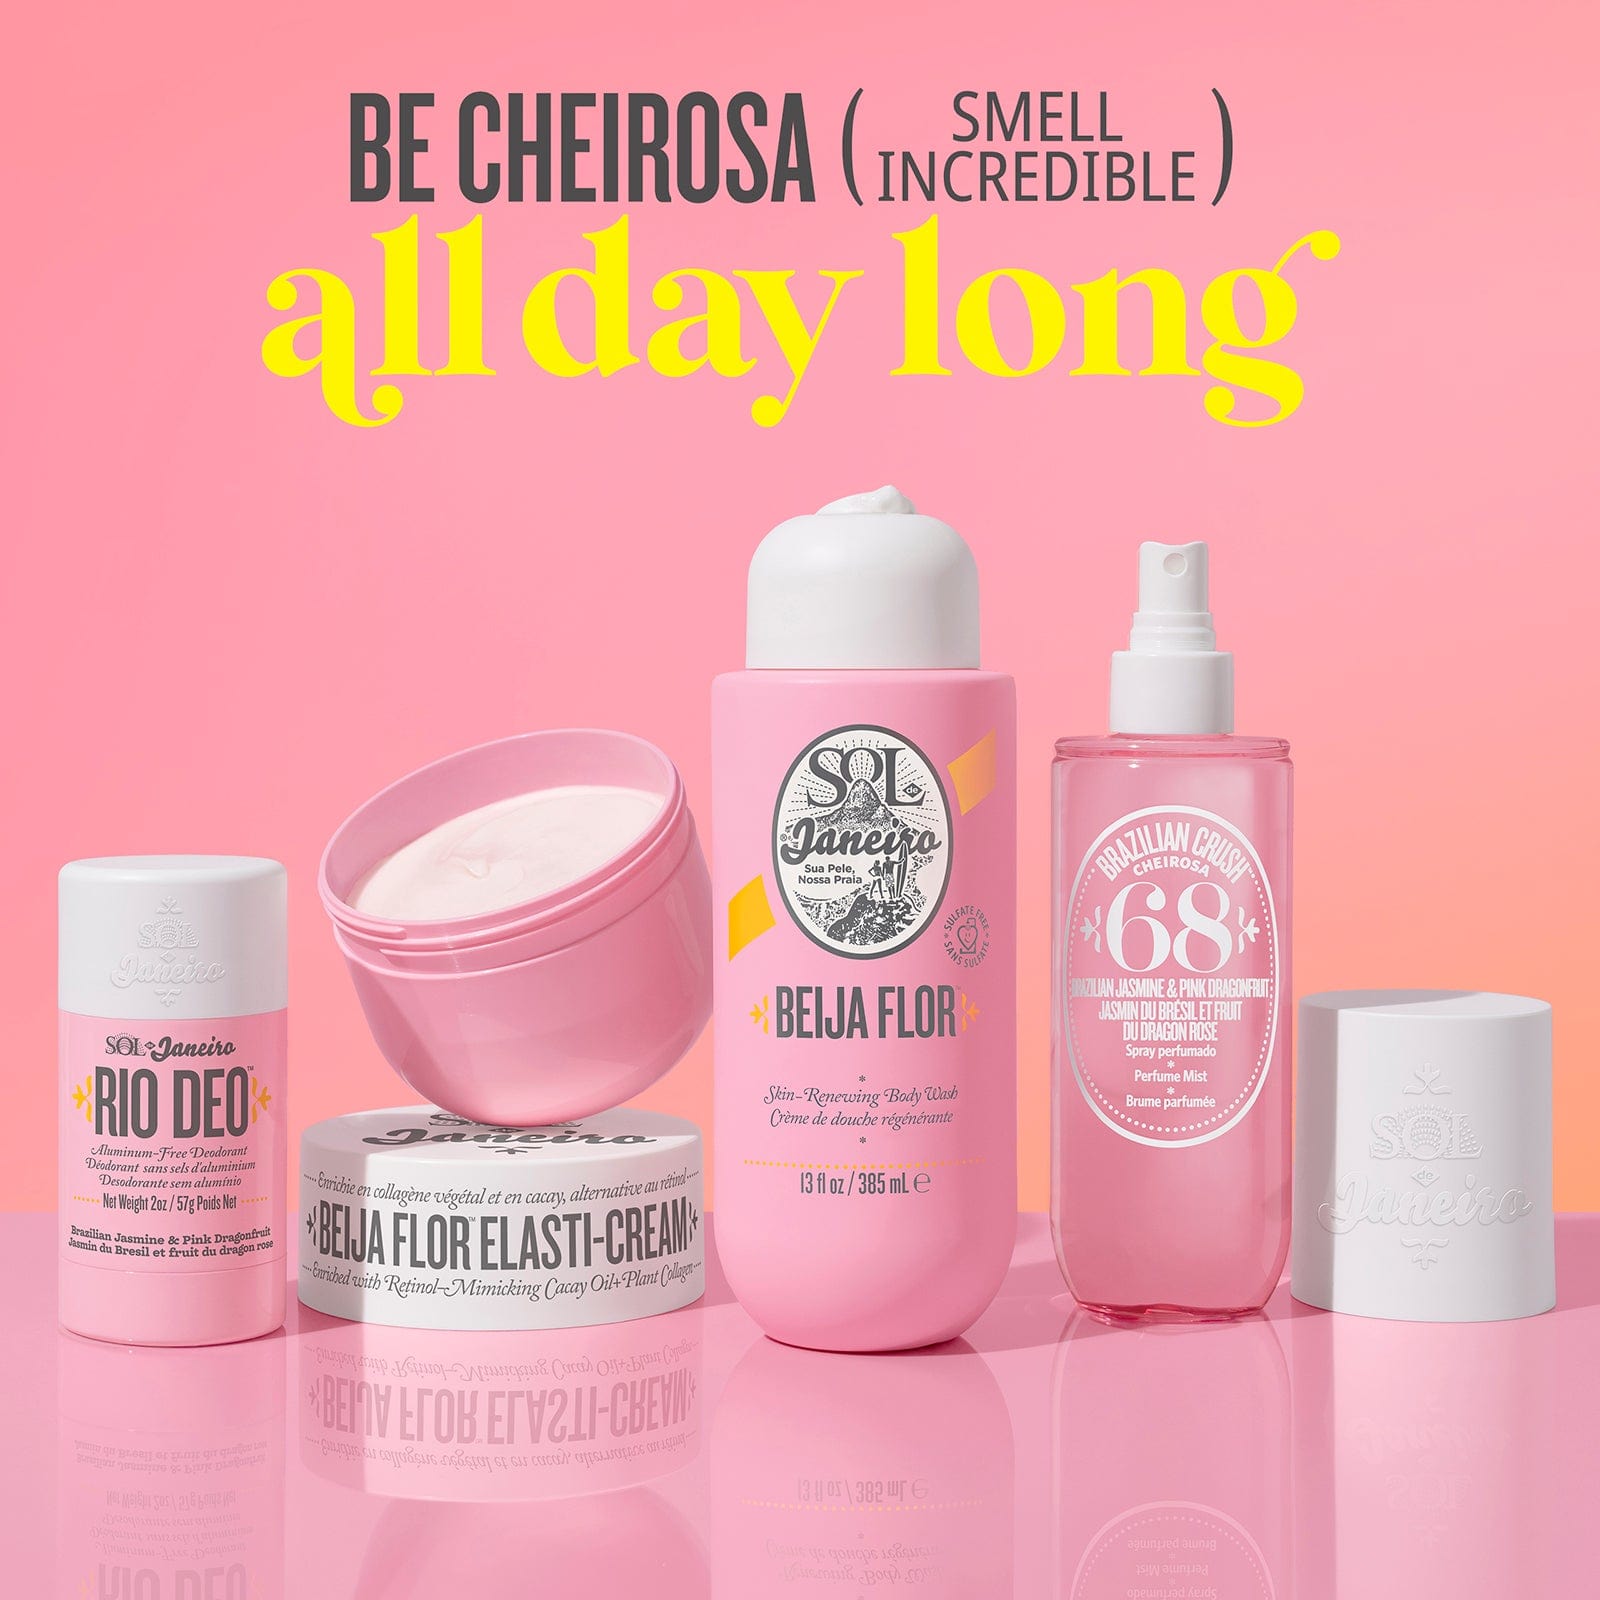 Be cheirosa (smell incredible) all day long